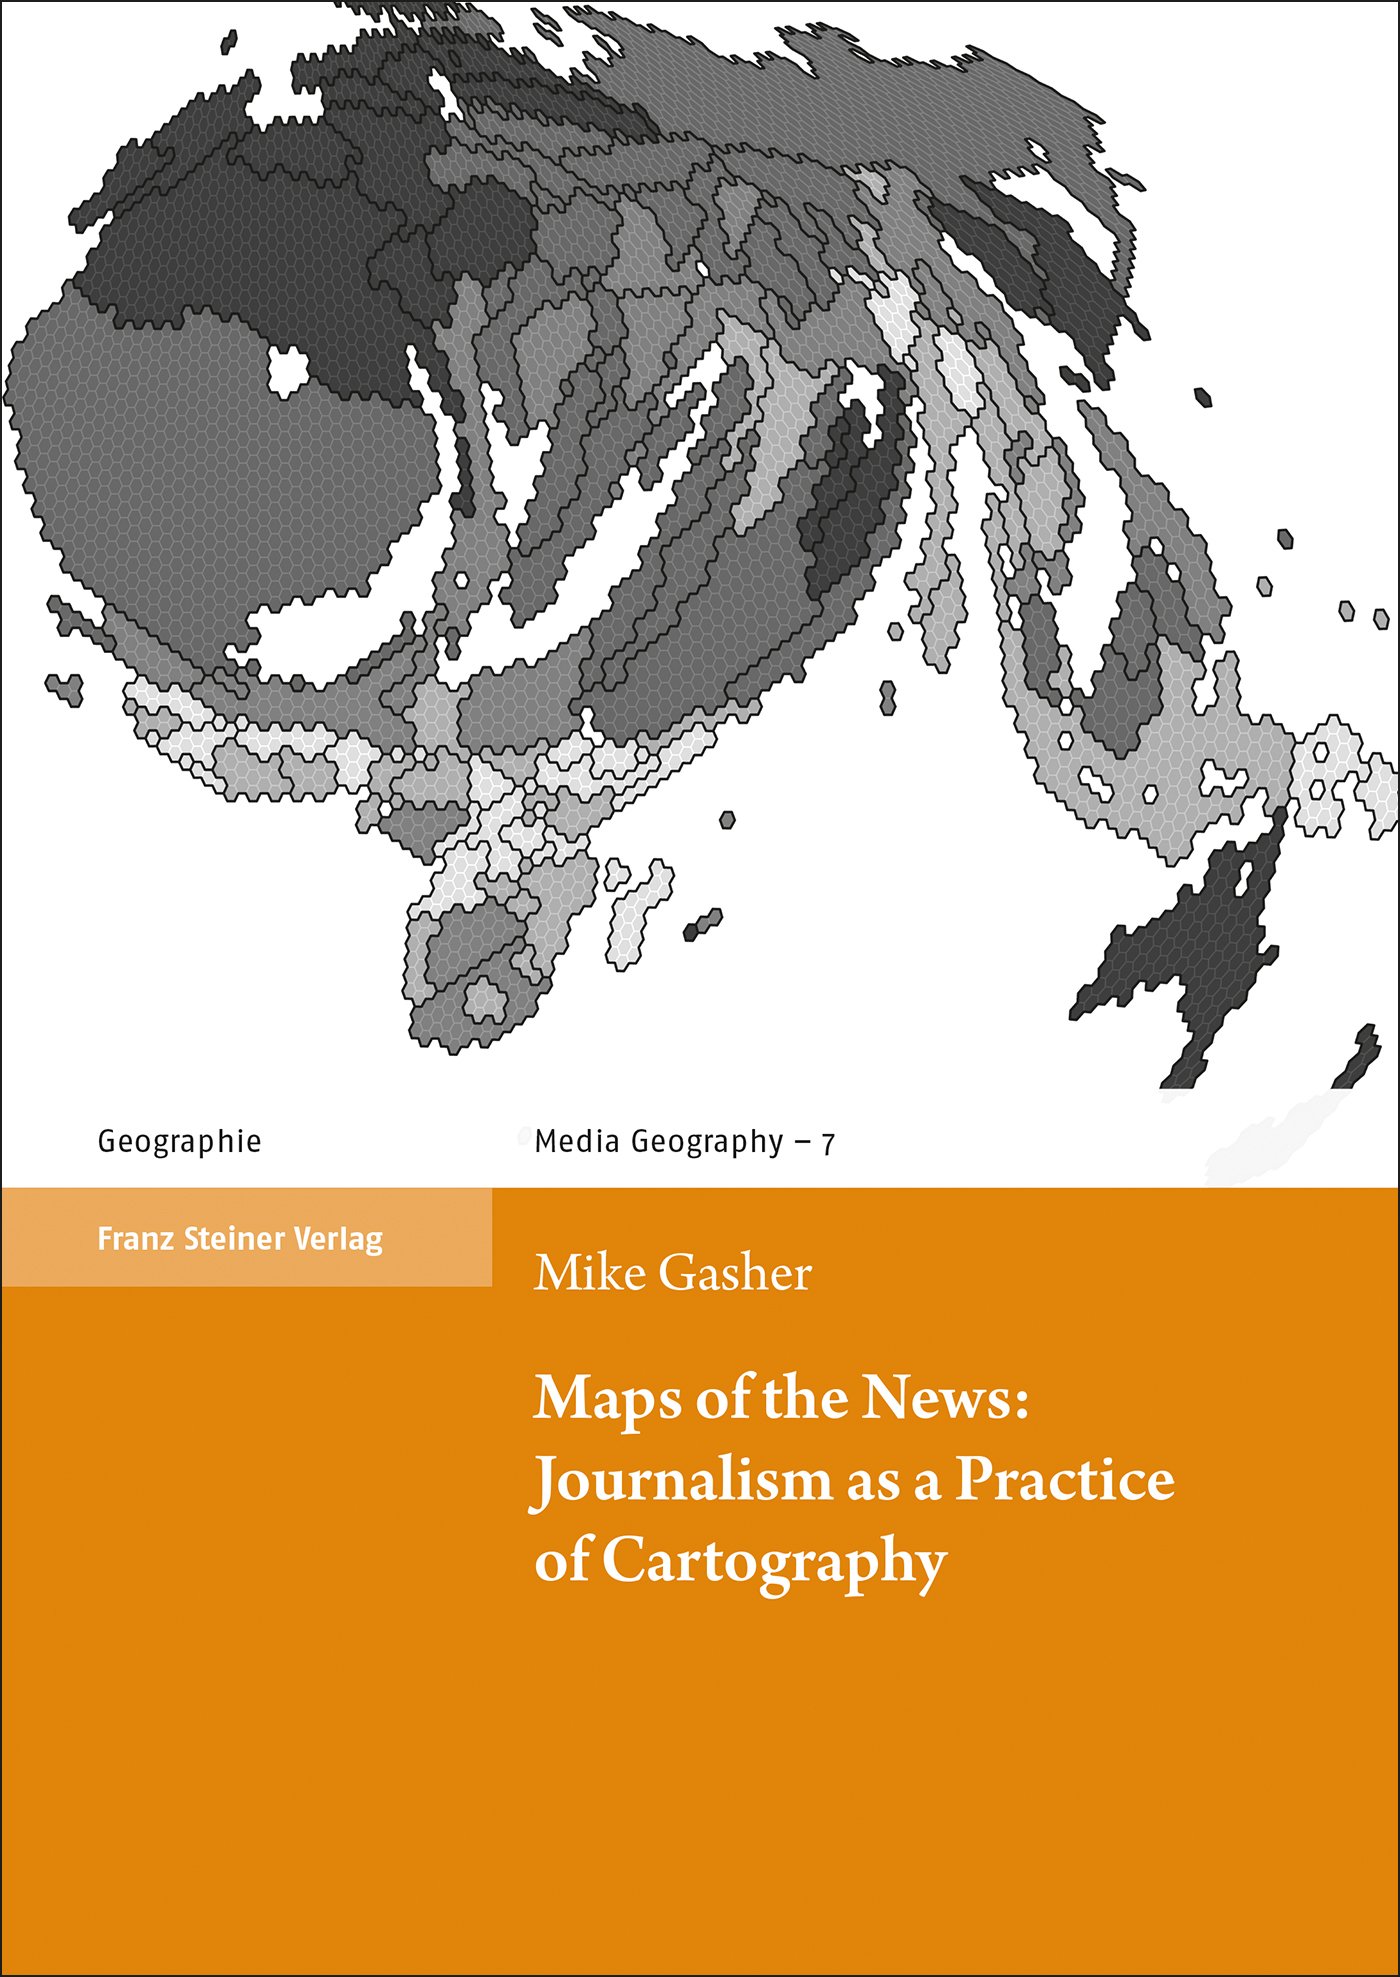 Maps of the News: Journalism as a Practice of Cartography